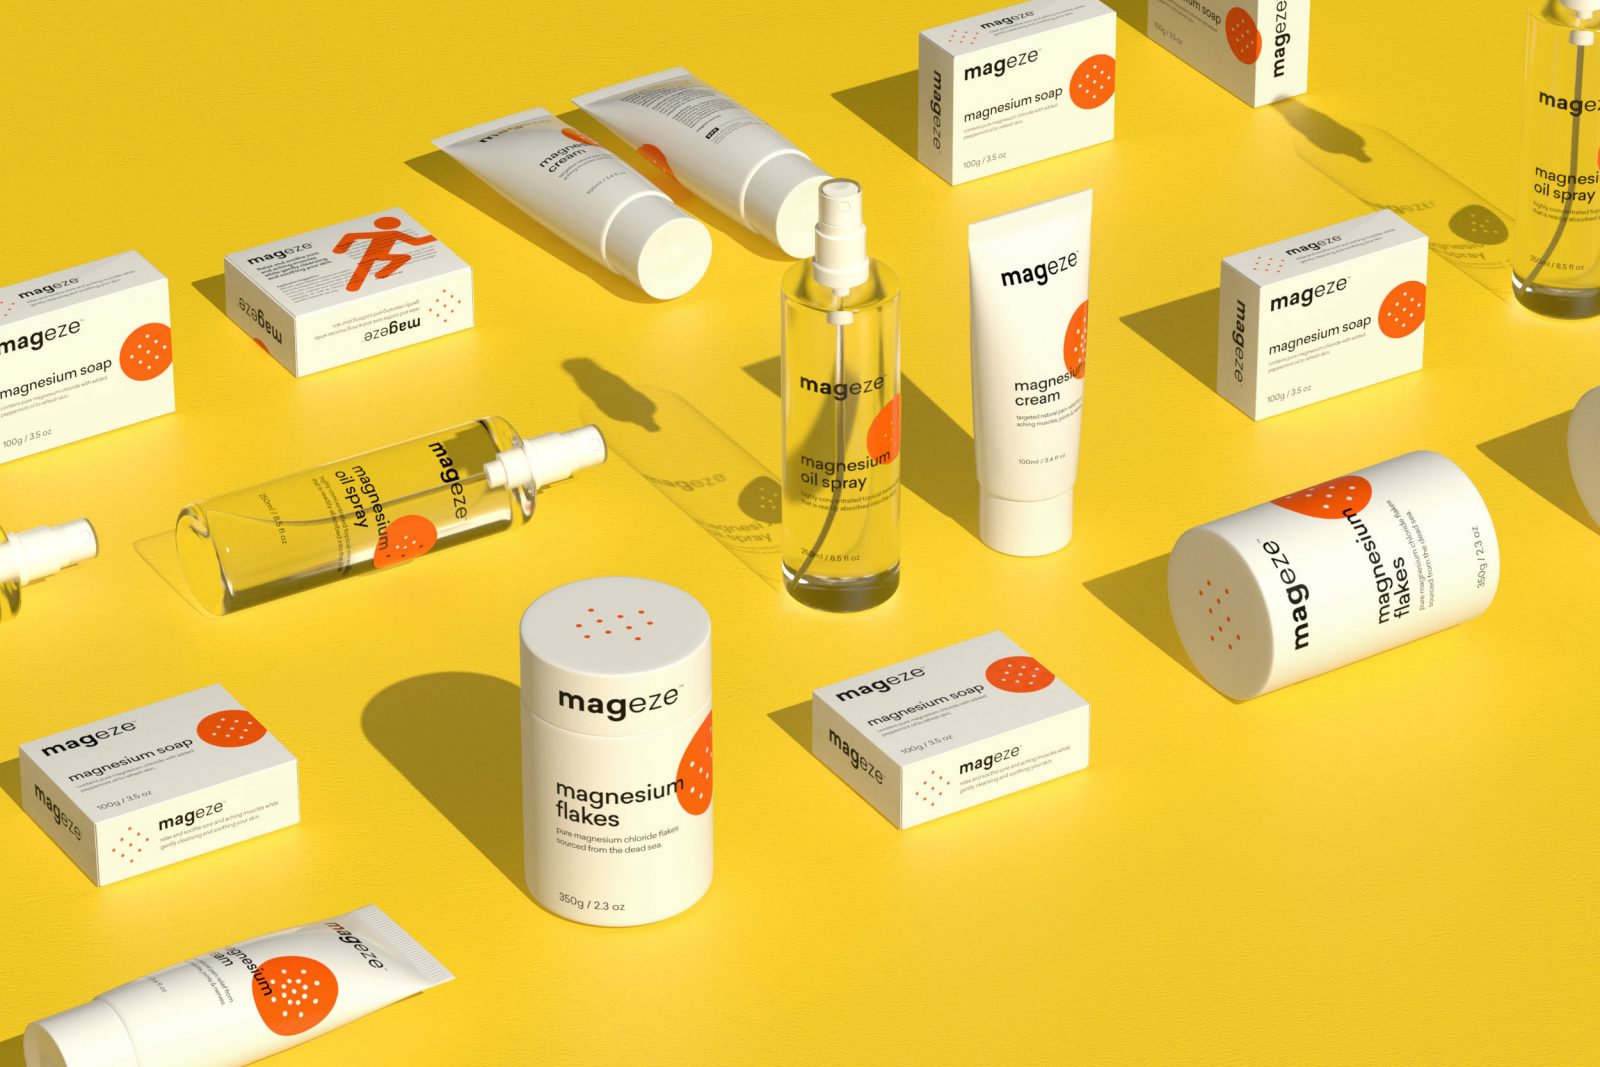 Identity Design & Packaging for “Mageze” Magnesium Products